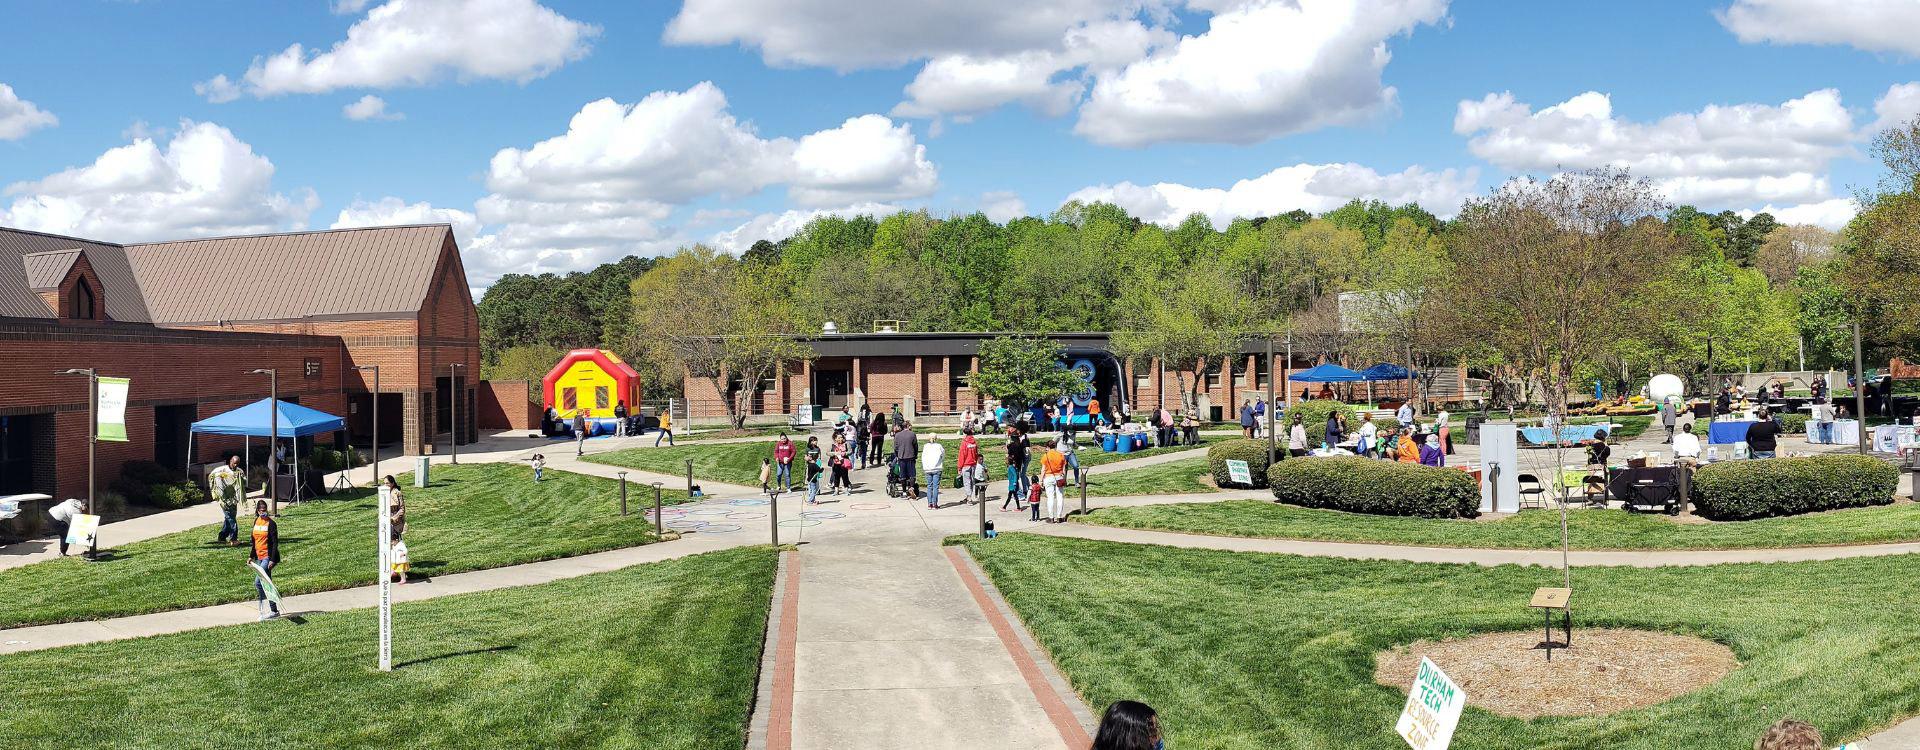 wide angle view of the center of main campus during a student welcome event